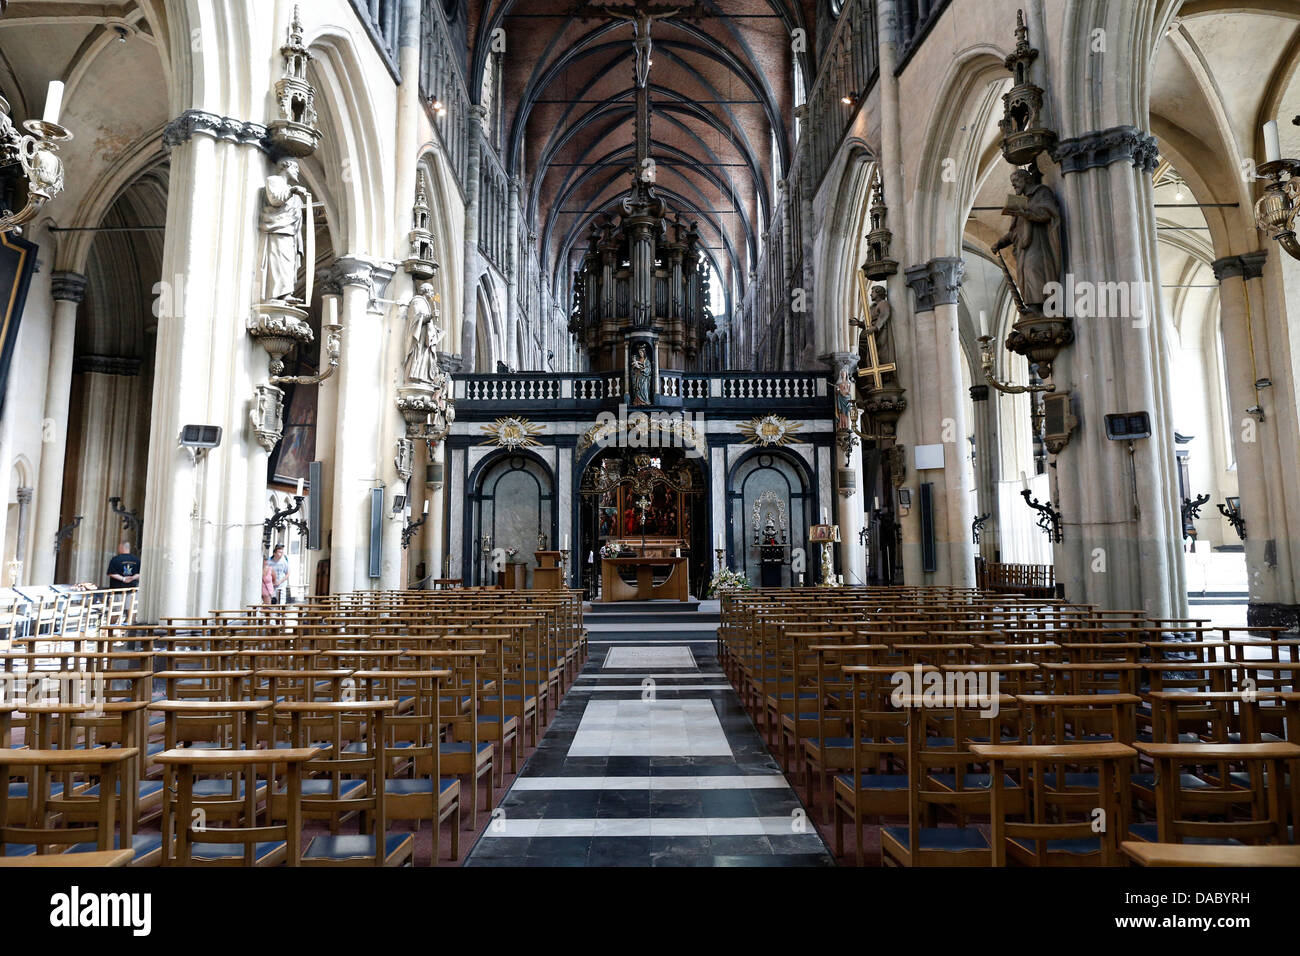 Central nave, Church of Our Lady, Bruges, West Flanders, Belgium, Europe Stock Photo